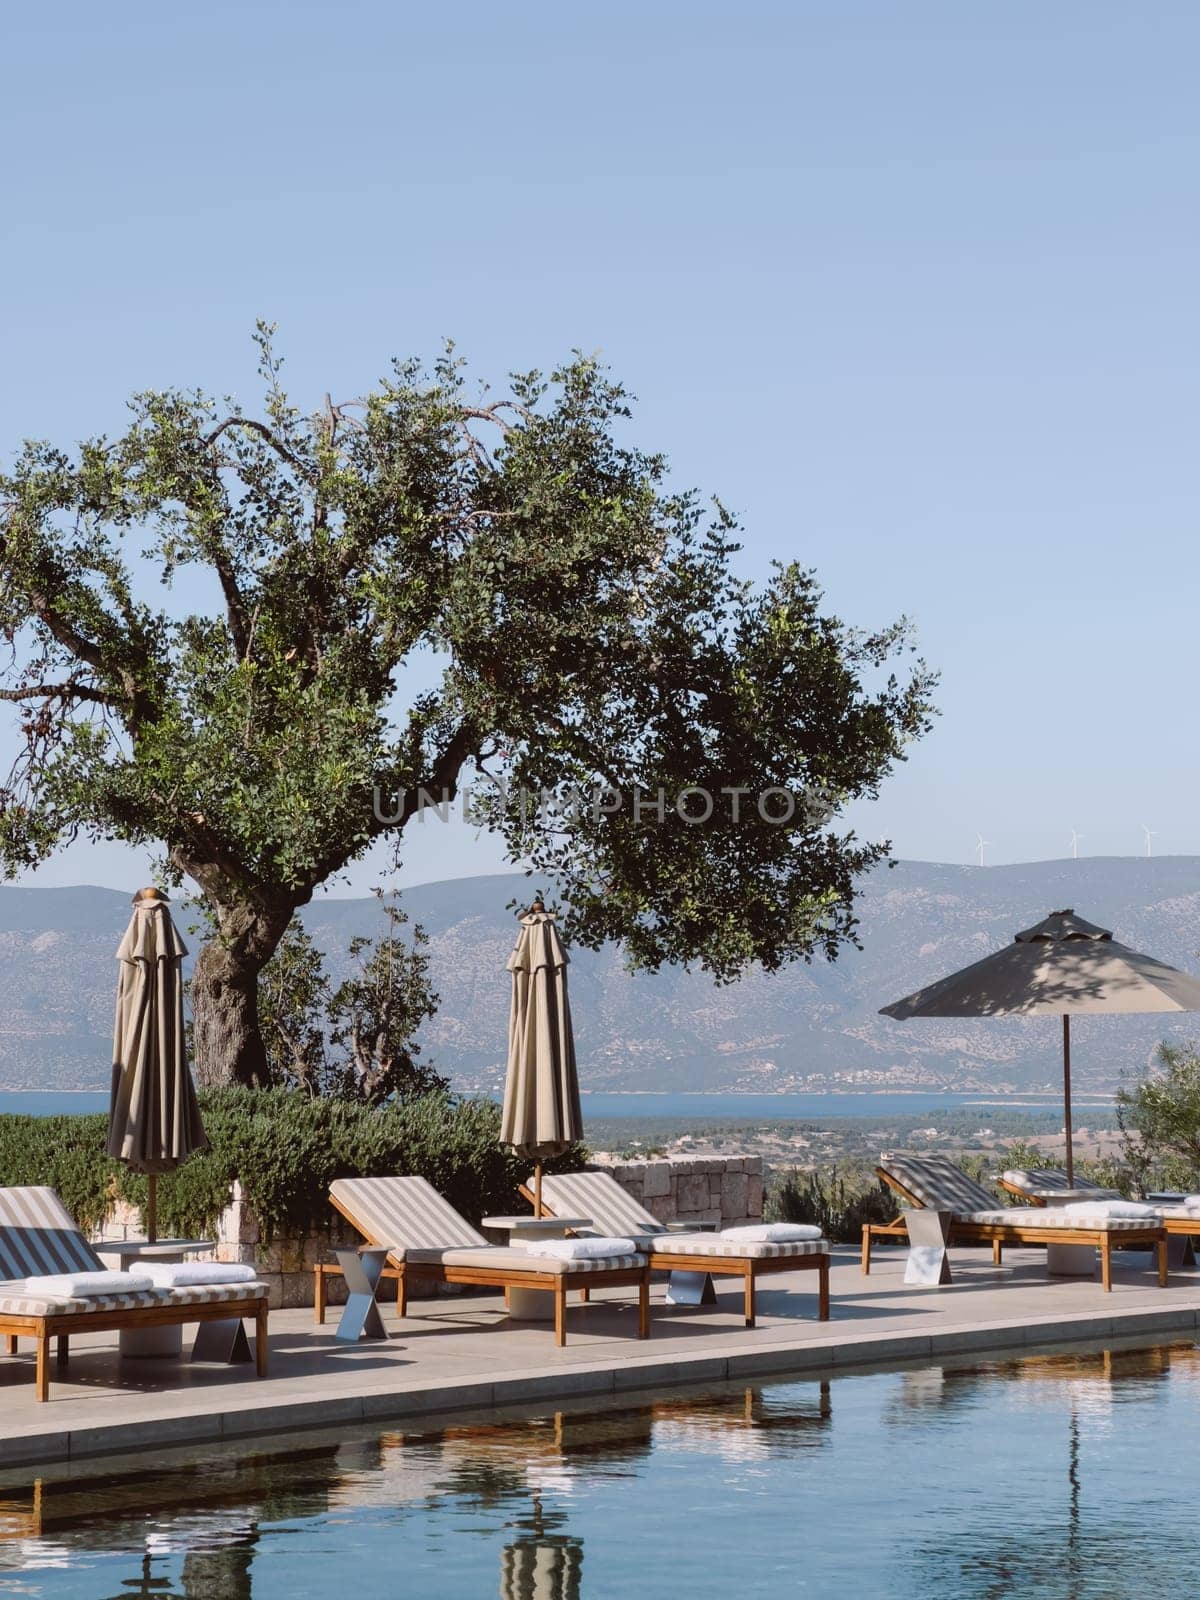 Sun loungers and sun umbrellas stand by the pool against the backdrop of the mountains. Hotel Amanzoe, Greece by Nadtochiy